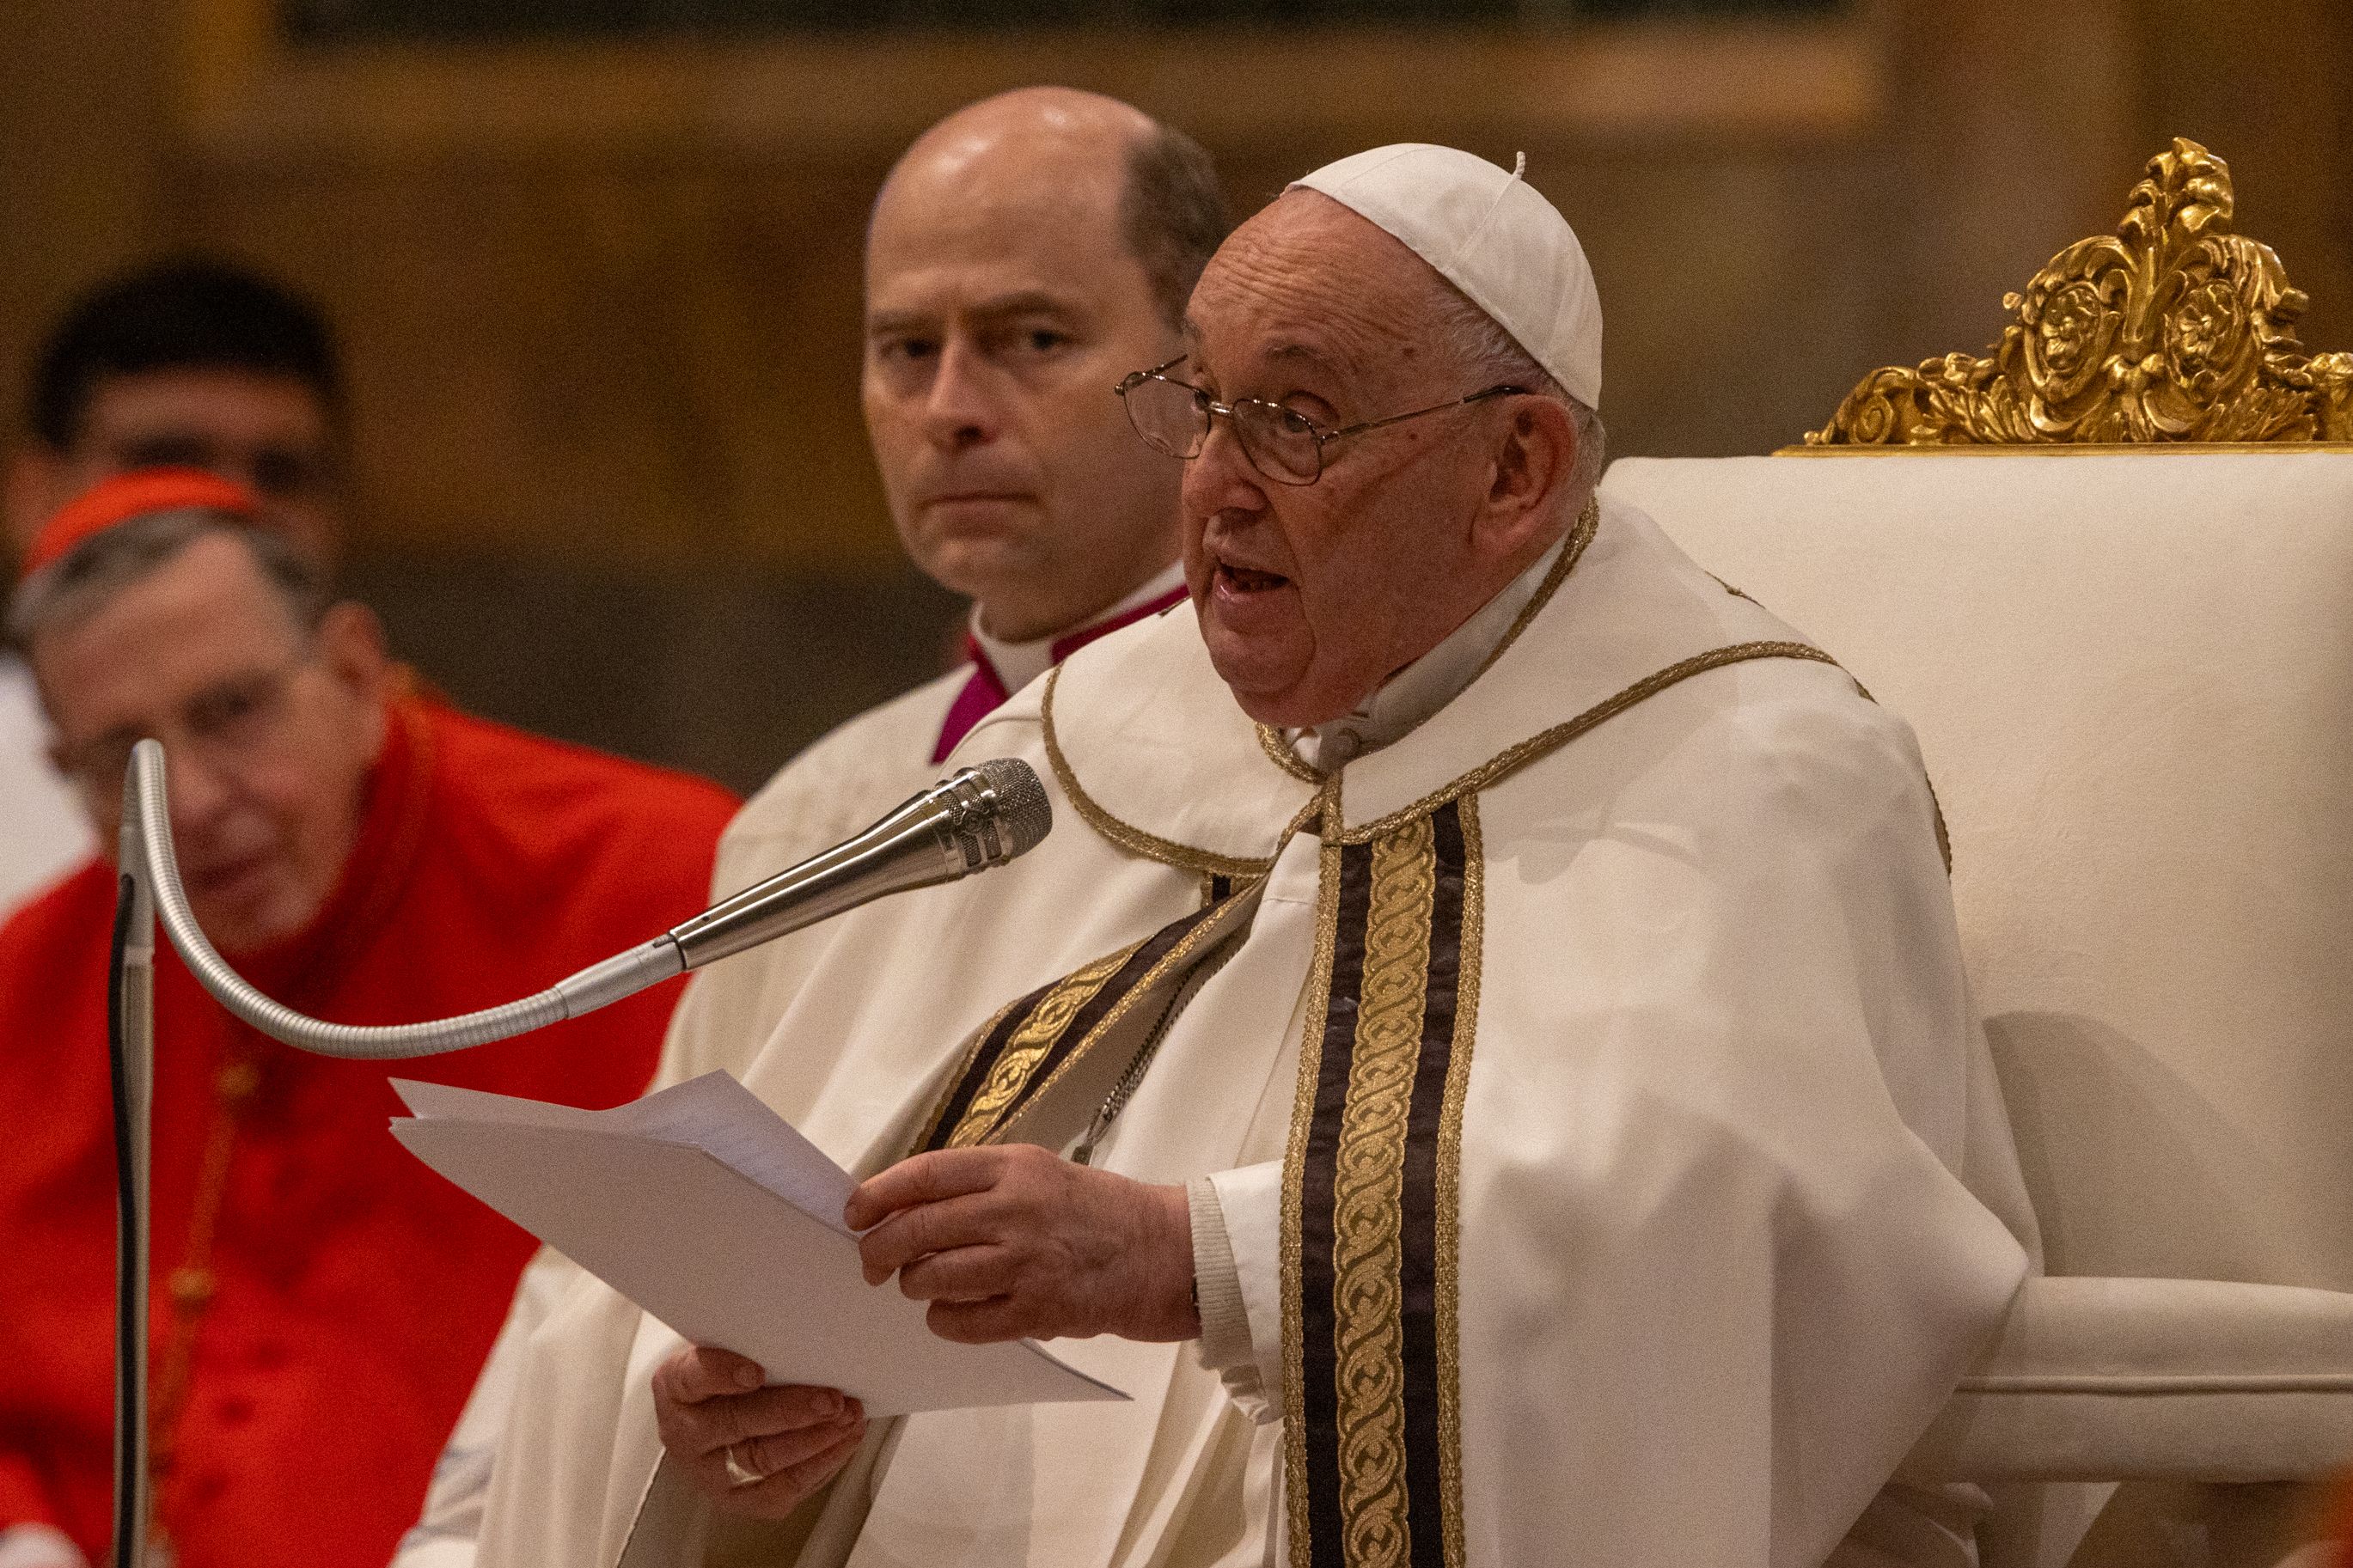 Christian unity must be rooted in prayer, pope says at ecumenical vespers